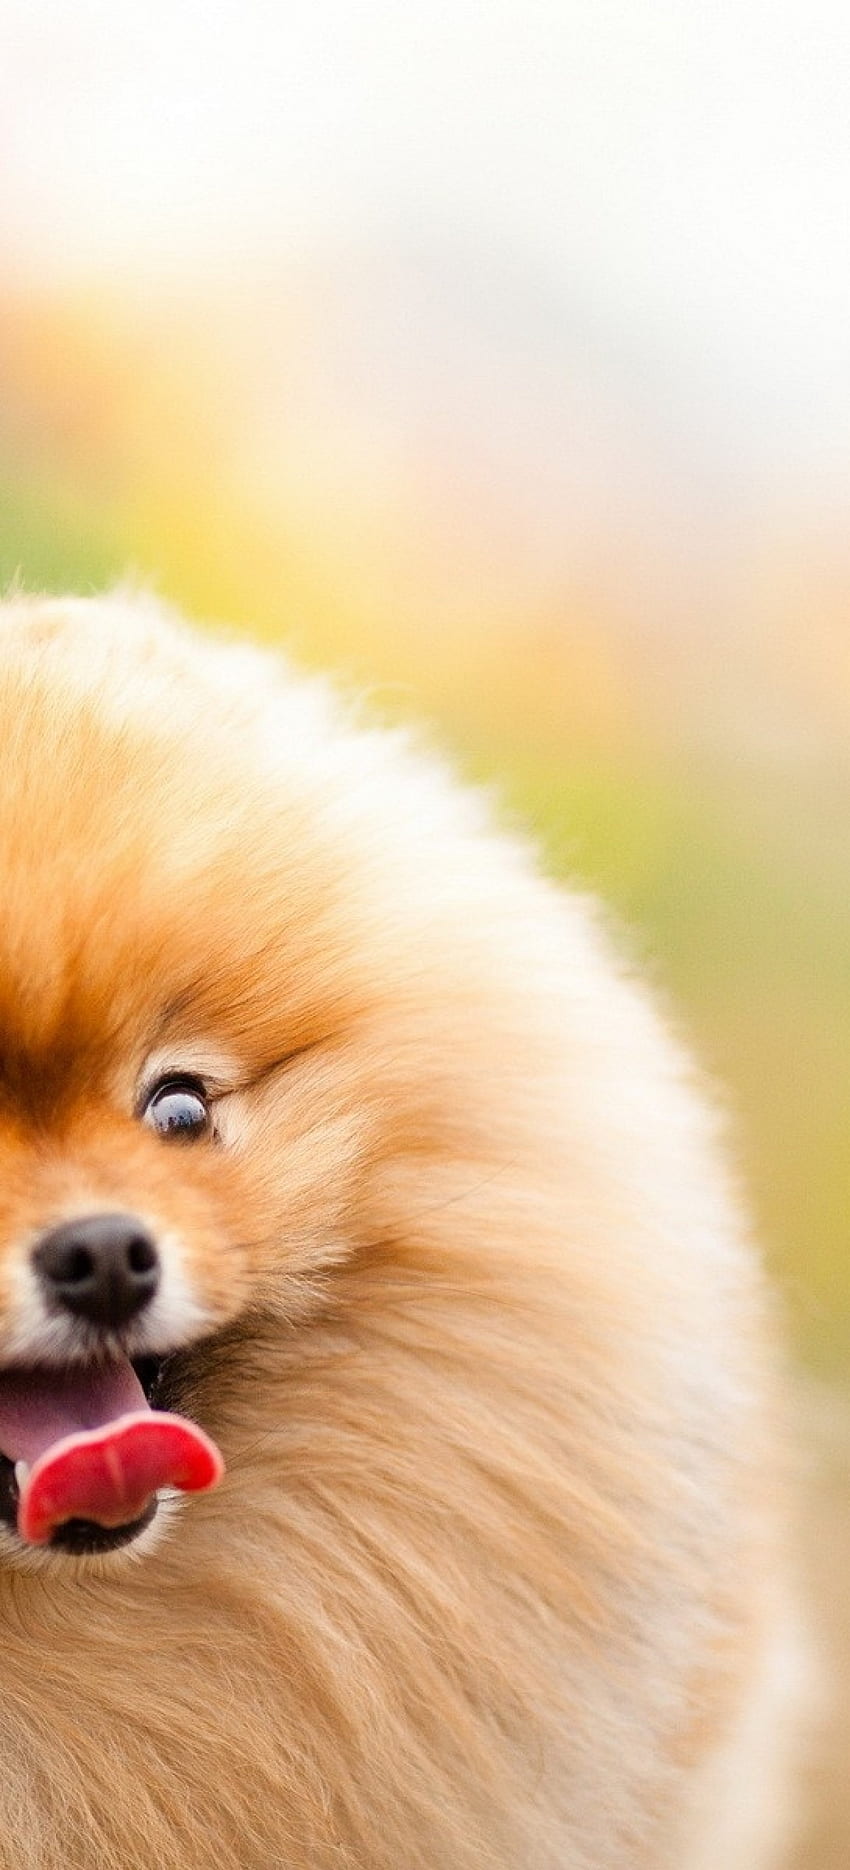 Pomeranian, Fluffy, Cute, Dogs for OnePlus 8 Pro, Oppo Find X2, Cute Fluffy Dogs HD phone wallpaper